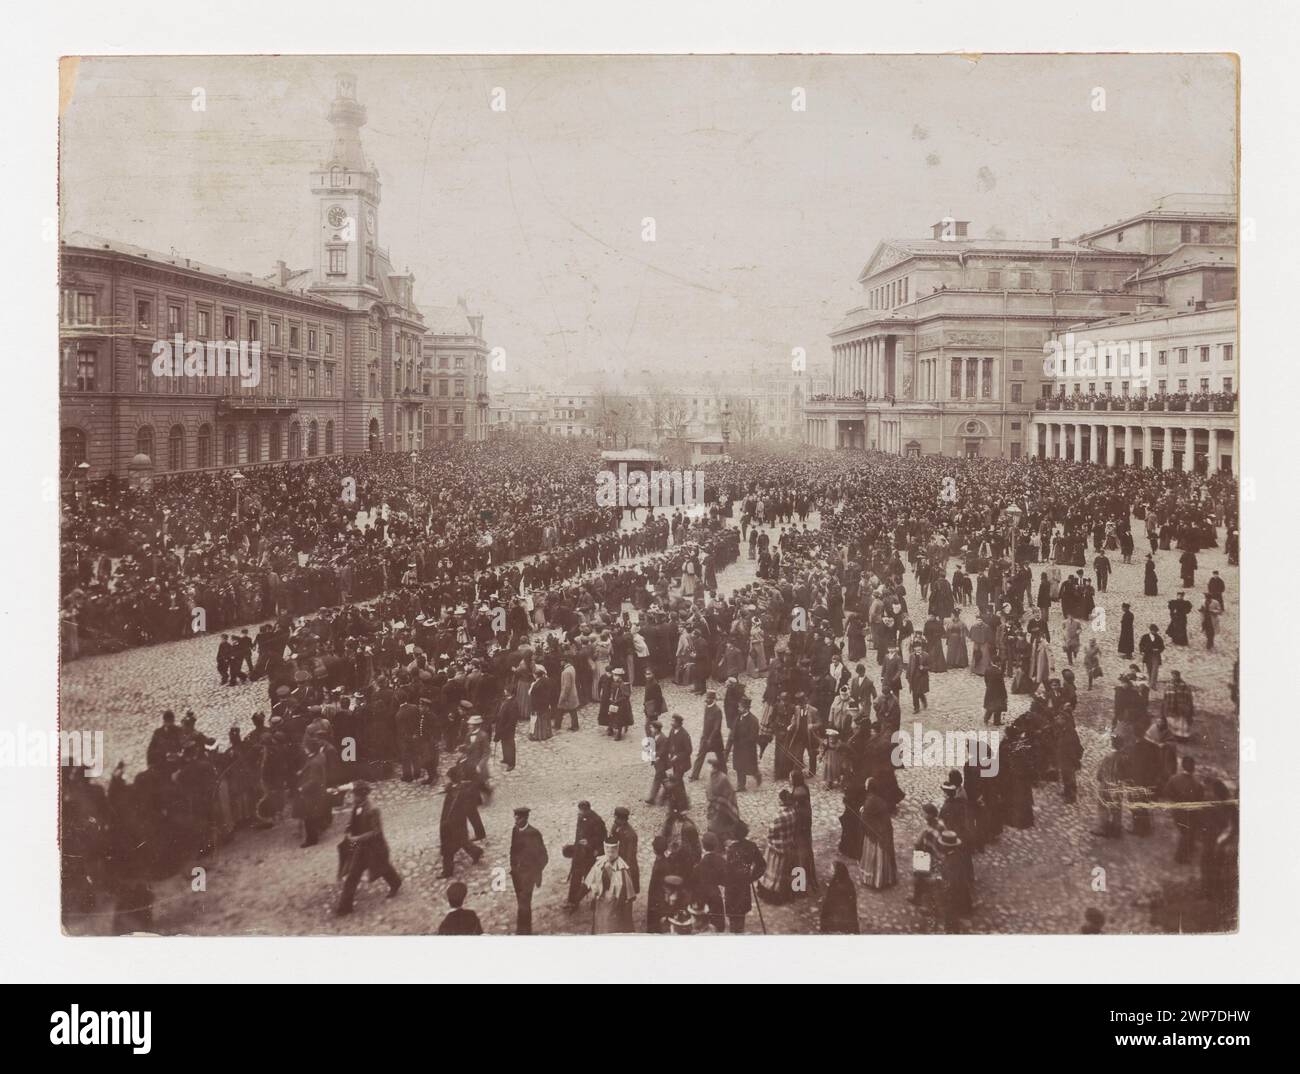 Warsaw. Funeral procession at Teatralny Square, in front of the Grand Theater building;  around 1900 (1895-00-00-1905-00-00);Jabłonowski Palace (Warsaw), Rajchman, Aleksander (1855-1915) - collection, town hall (Warsaw - 1818-1944), Wielki Theater (Warsaw), Warsaw (Masovian Voivodeship), architecture, Polish architecture, Funeralia, funeral conductors, square Teatralny (Warsaw), funerals Stock Photo